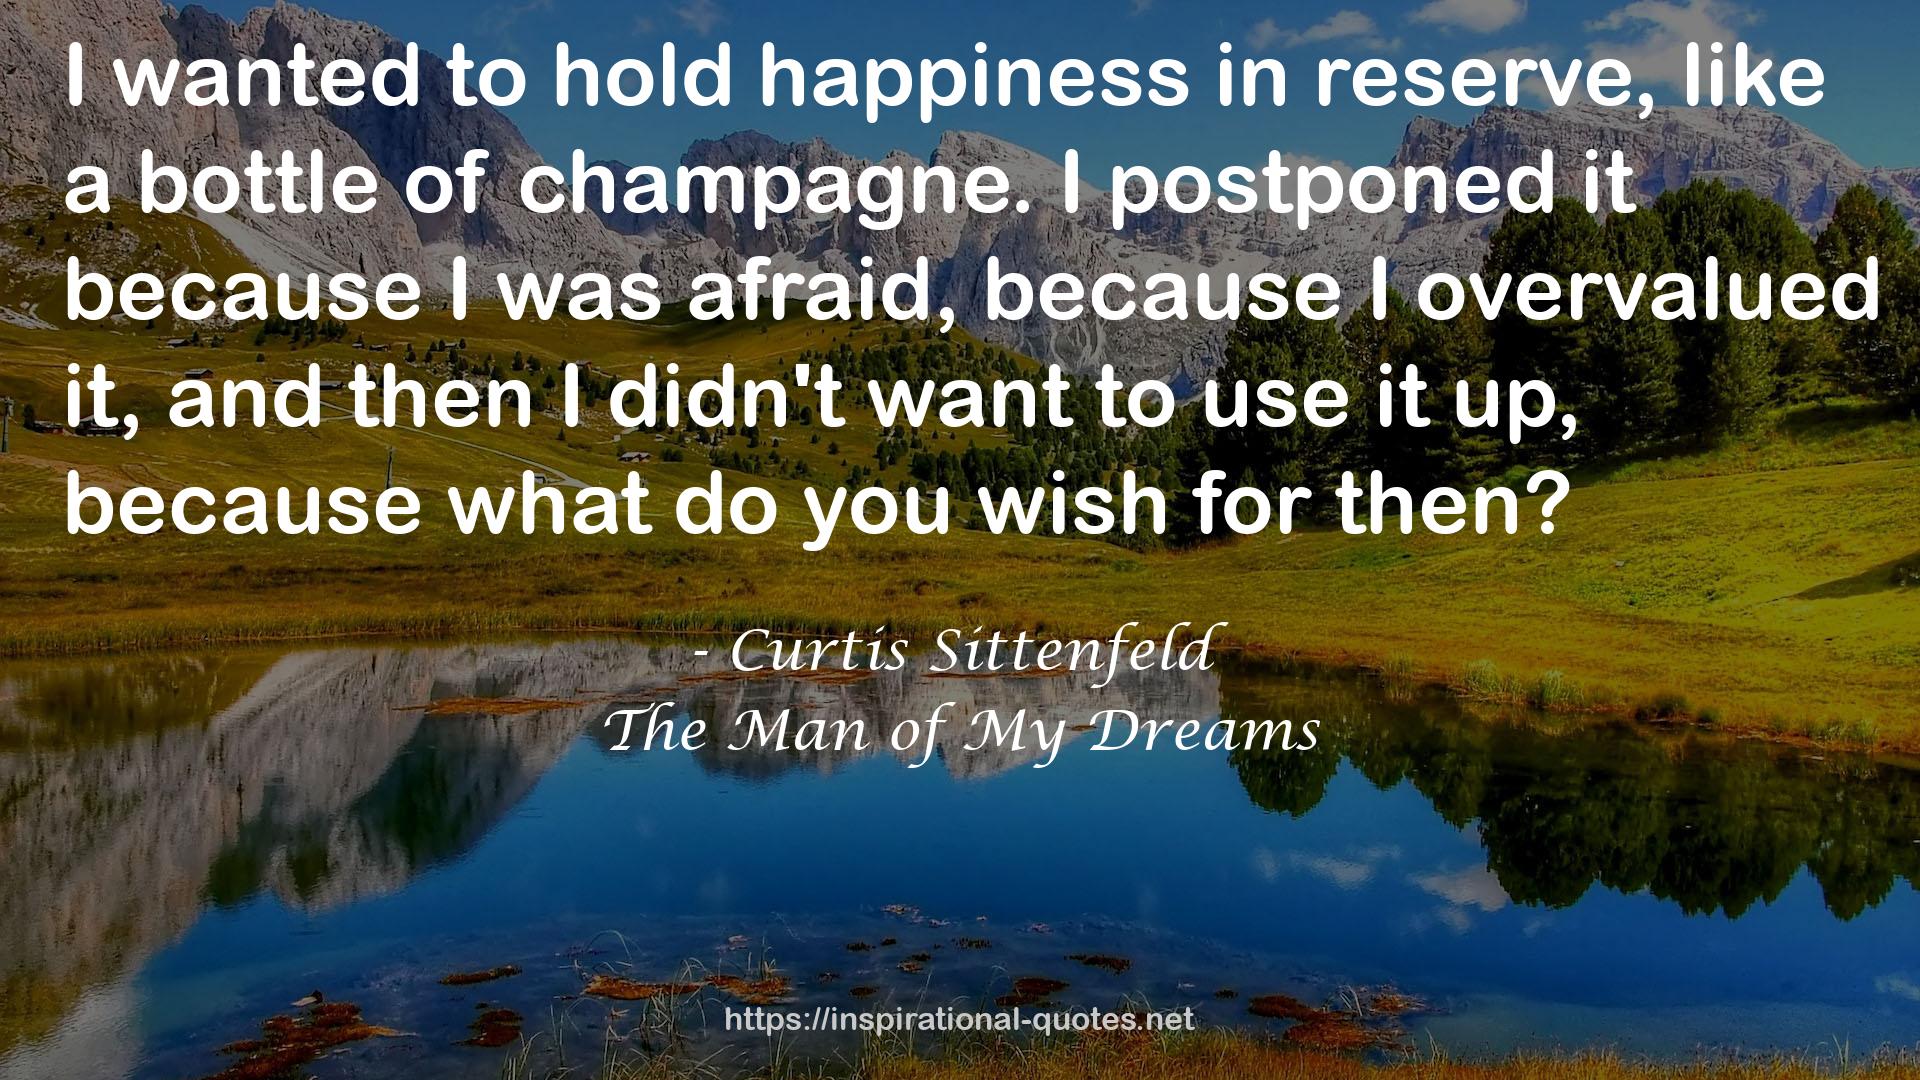 Curtis Sittenfeld QUOTES